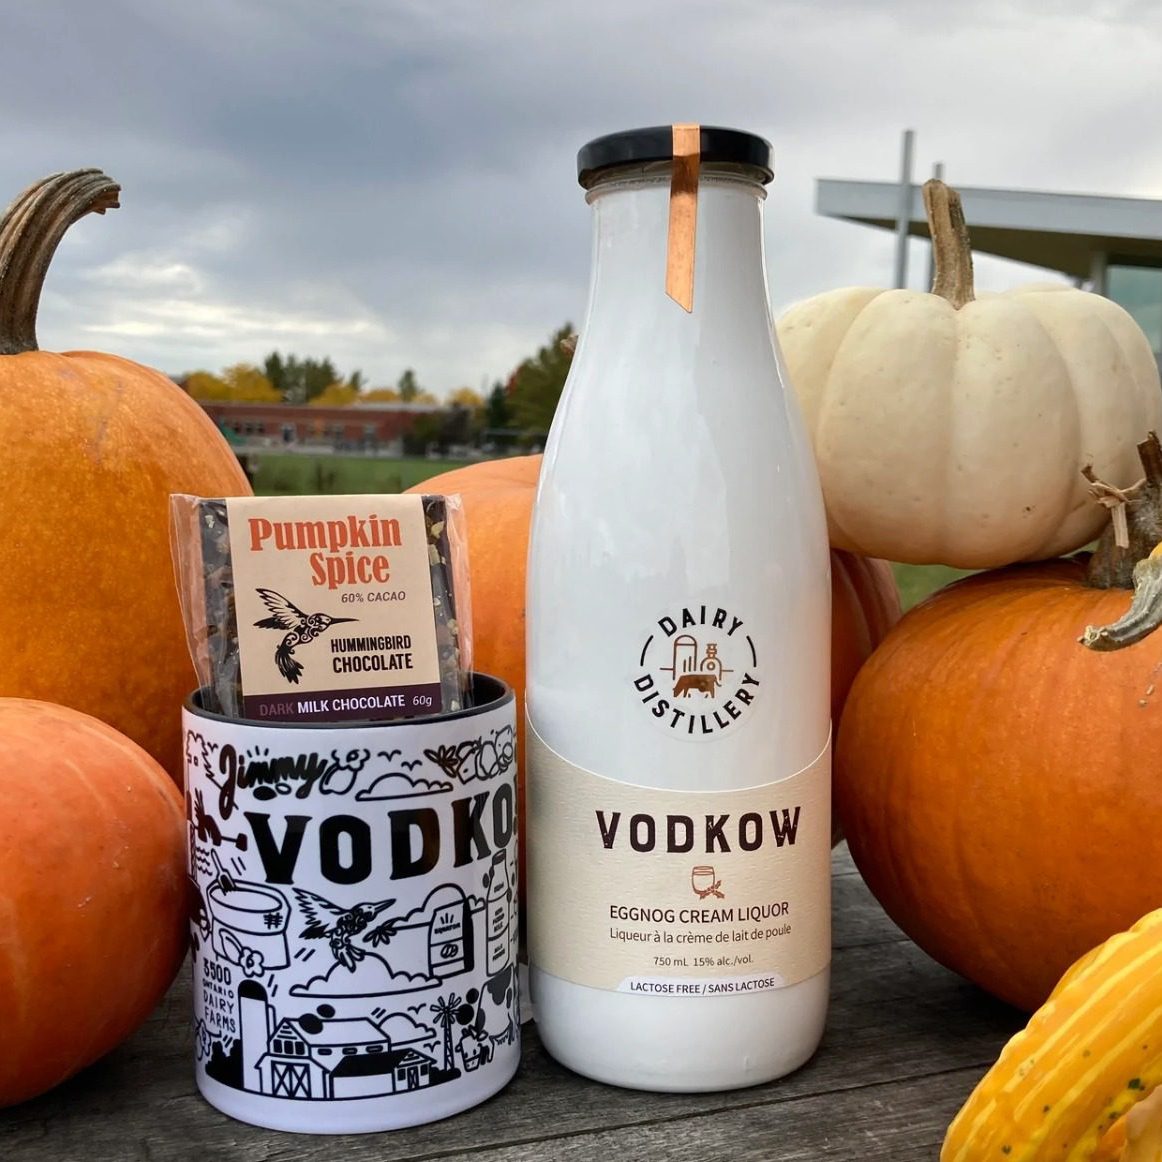 bottle of vodkow egg nog liqeur in front of pumpkins with a mug and pumpkin spice chocolate bar